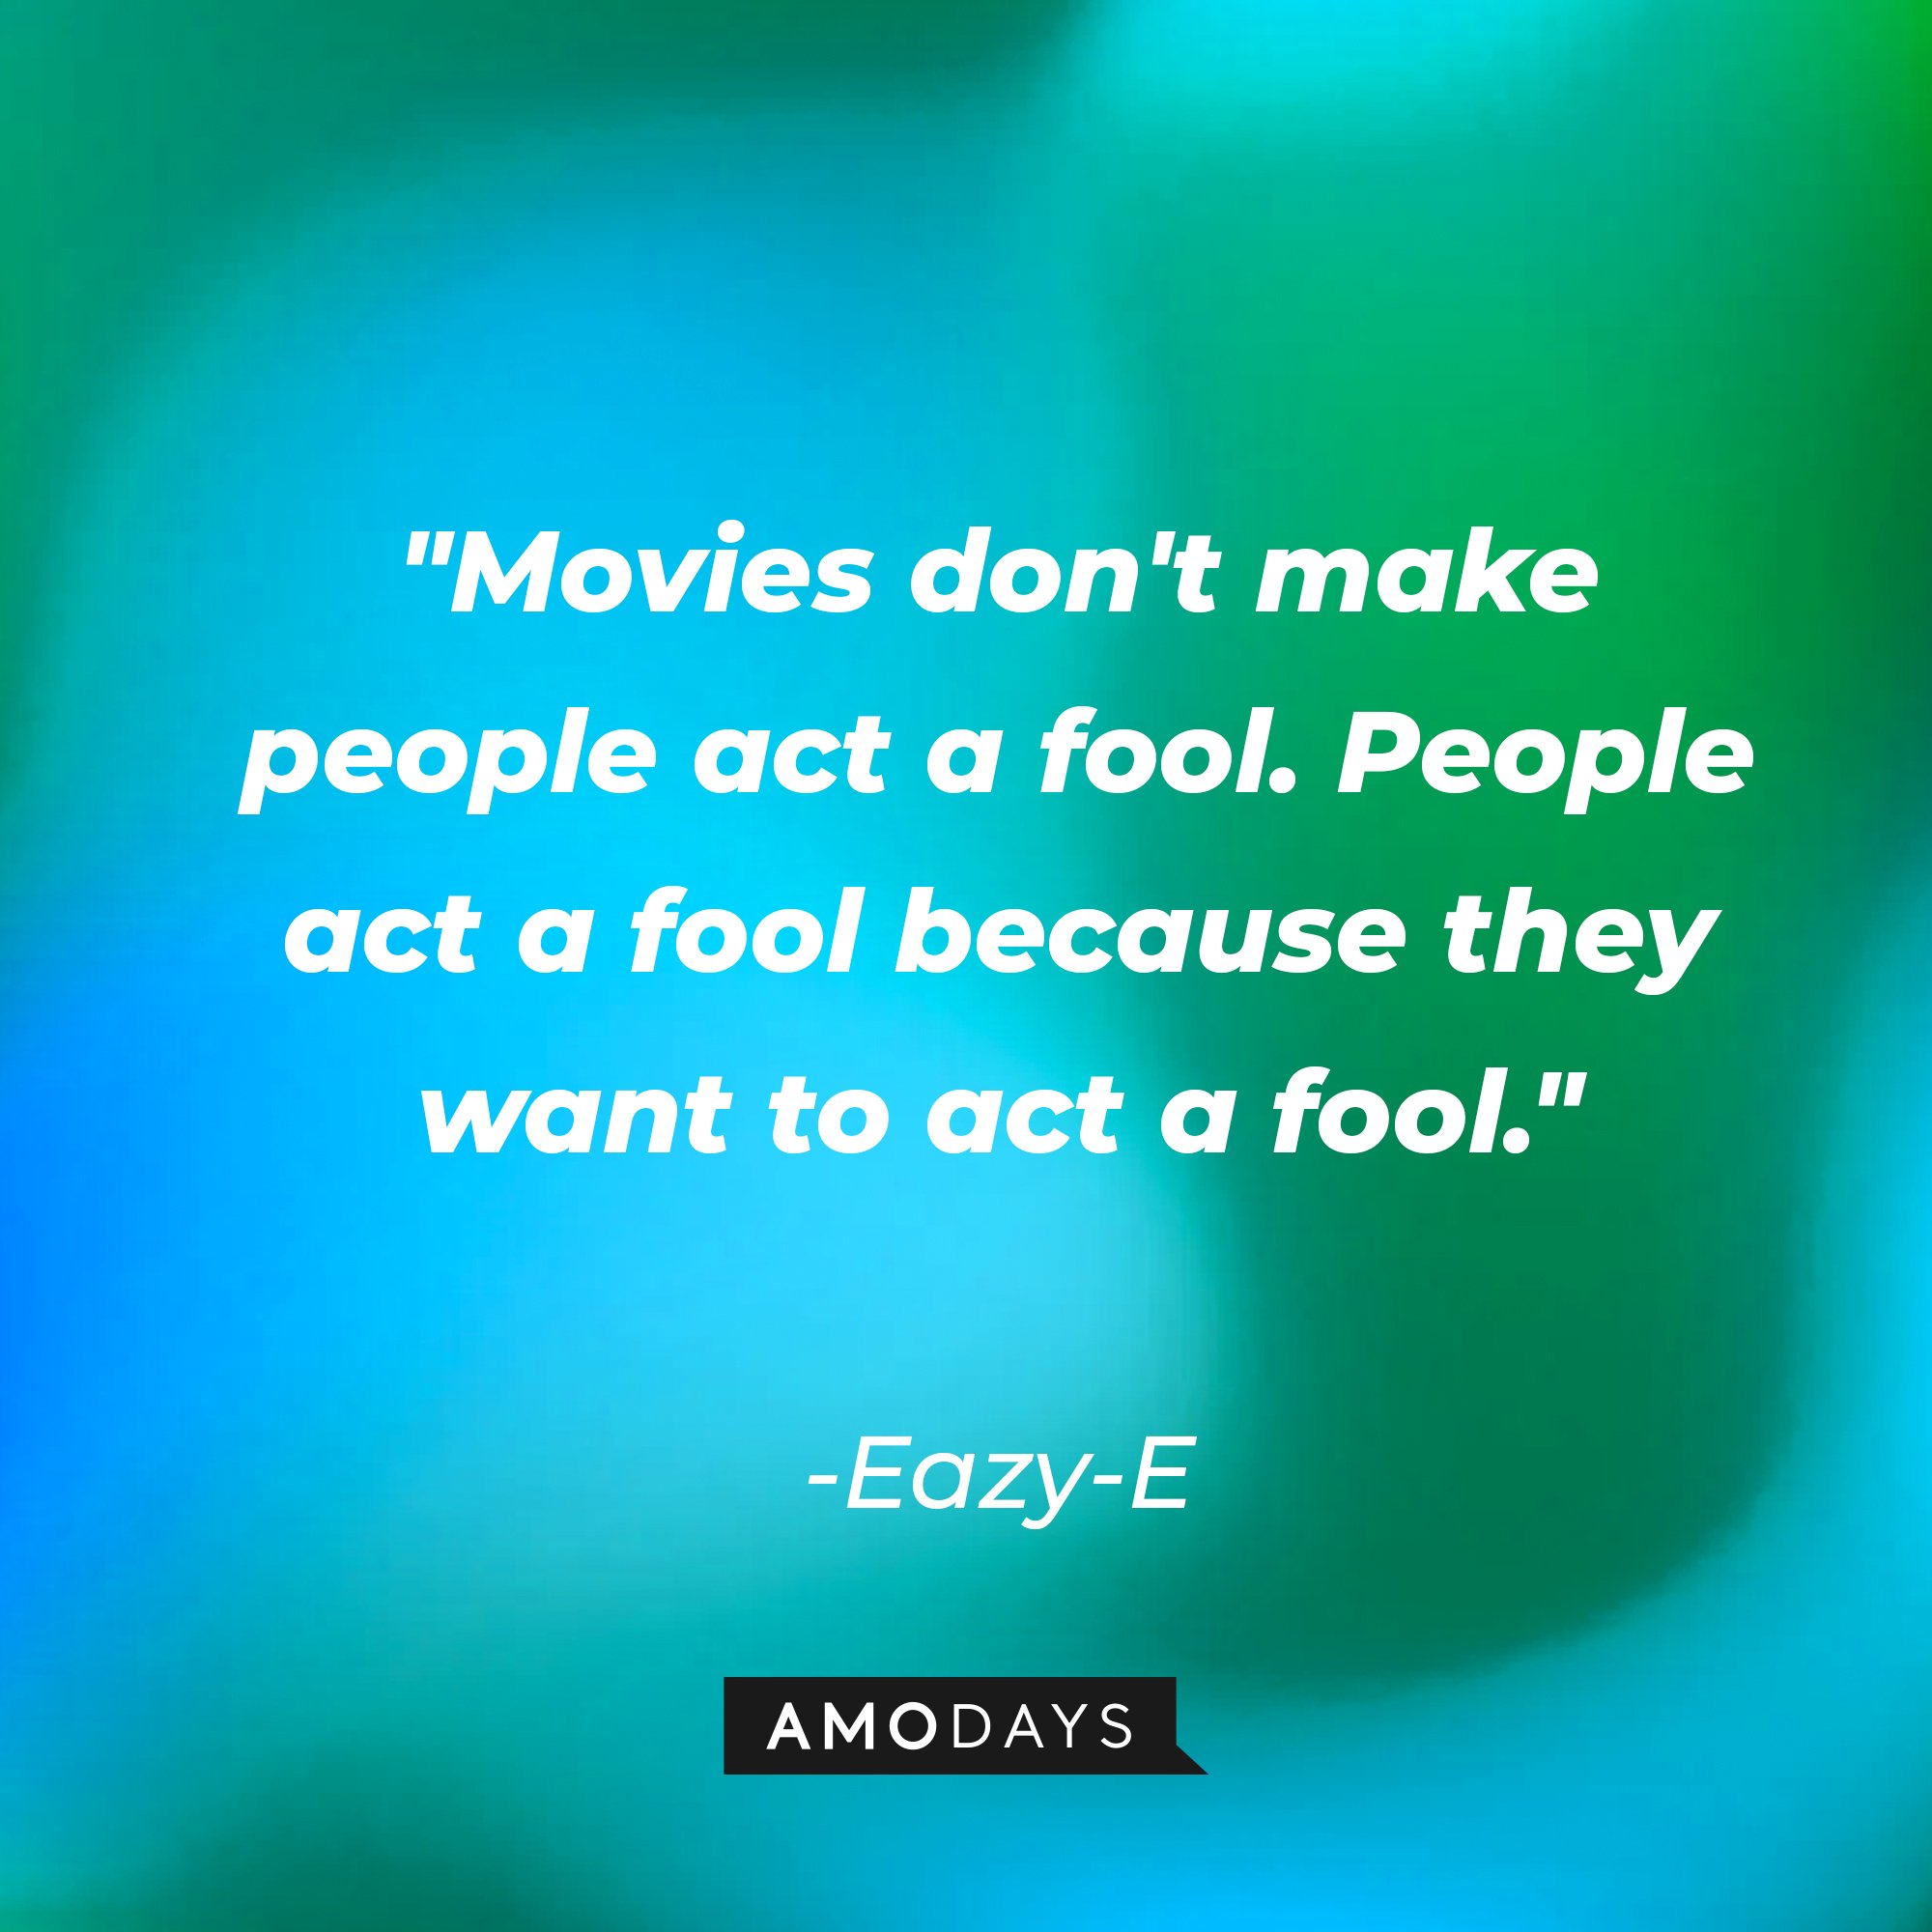 Eazy-E's quote: "Movies don't make people act a fool. People act a fool because they want to act a fool." | Image: AmoDays